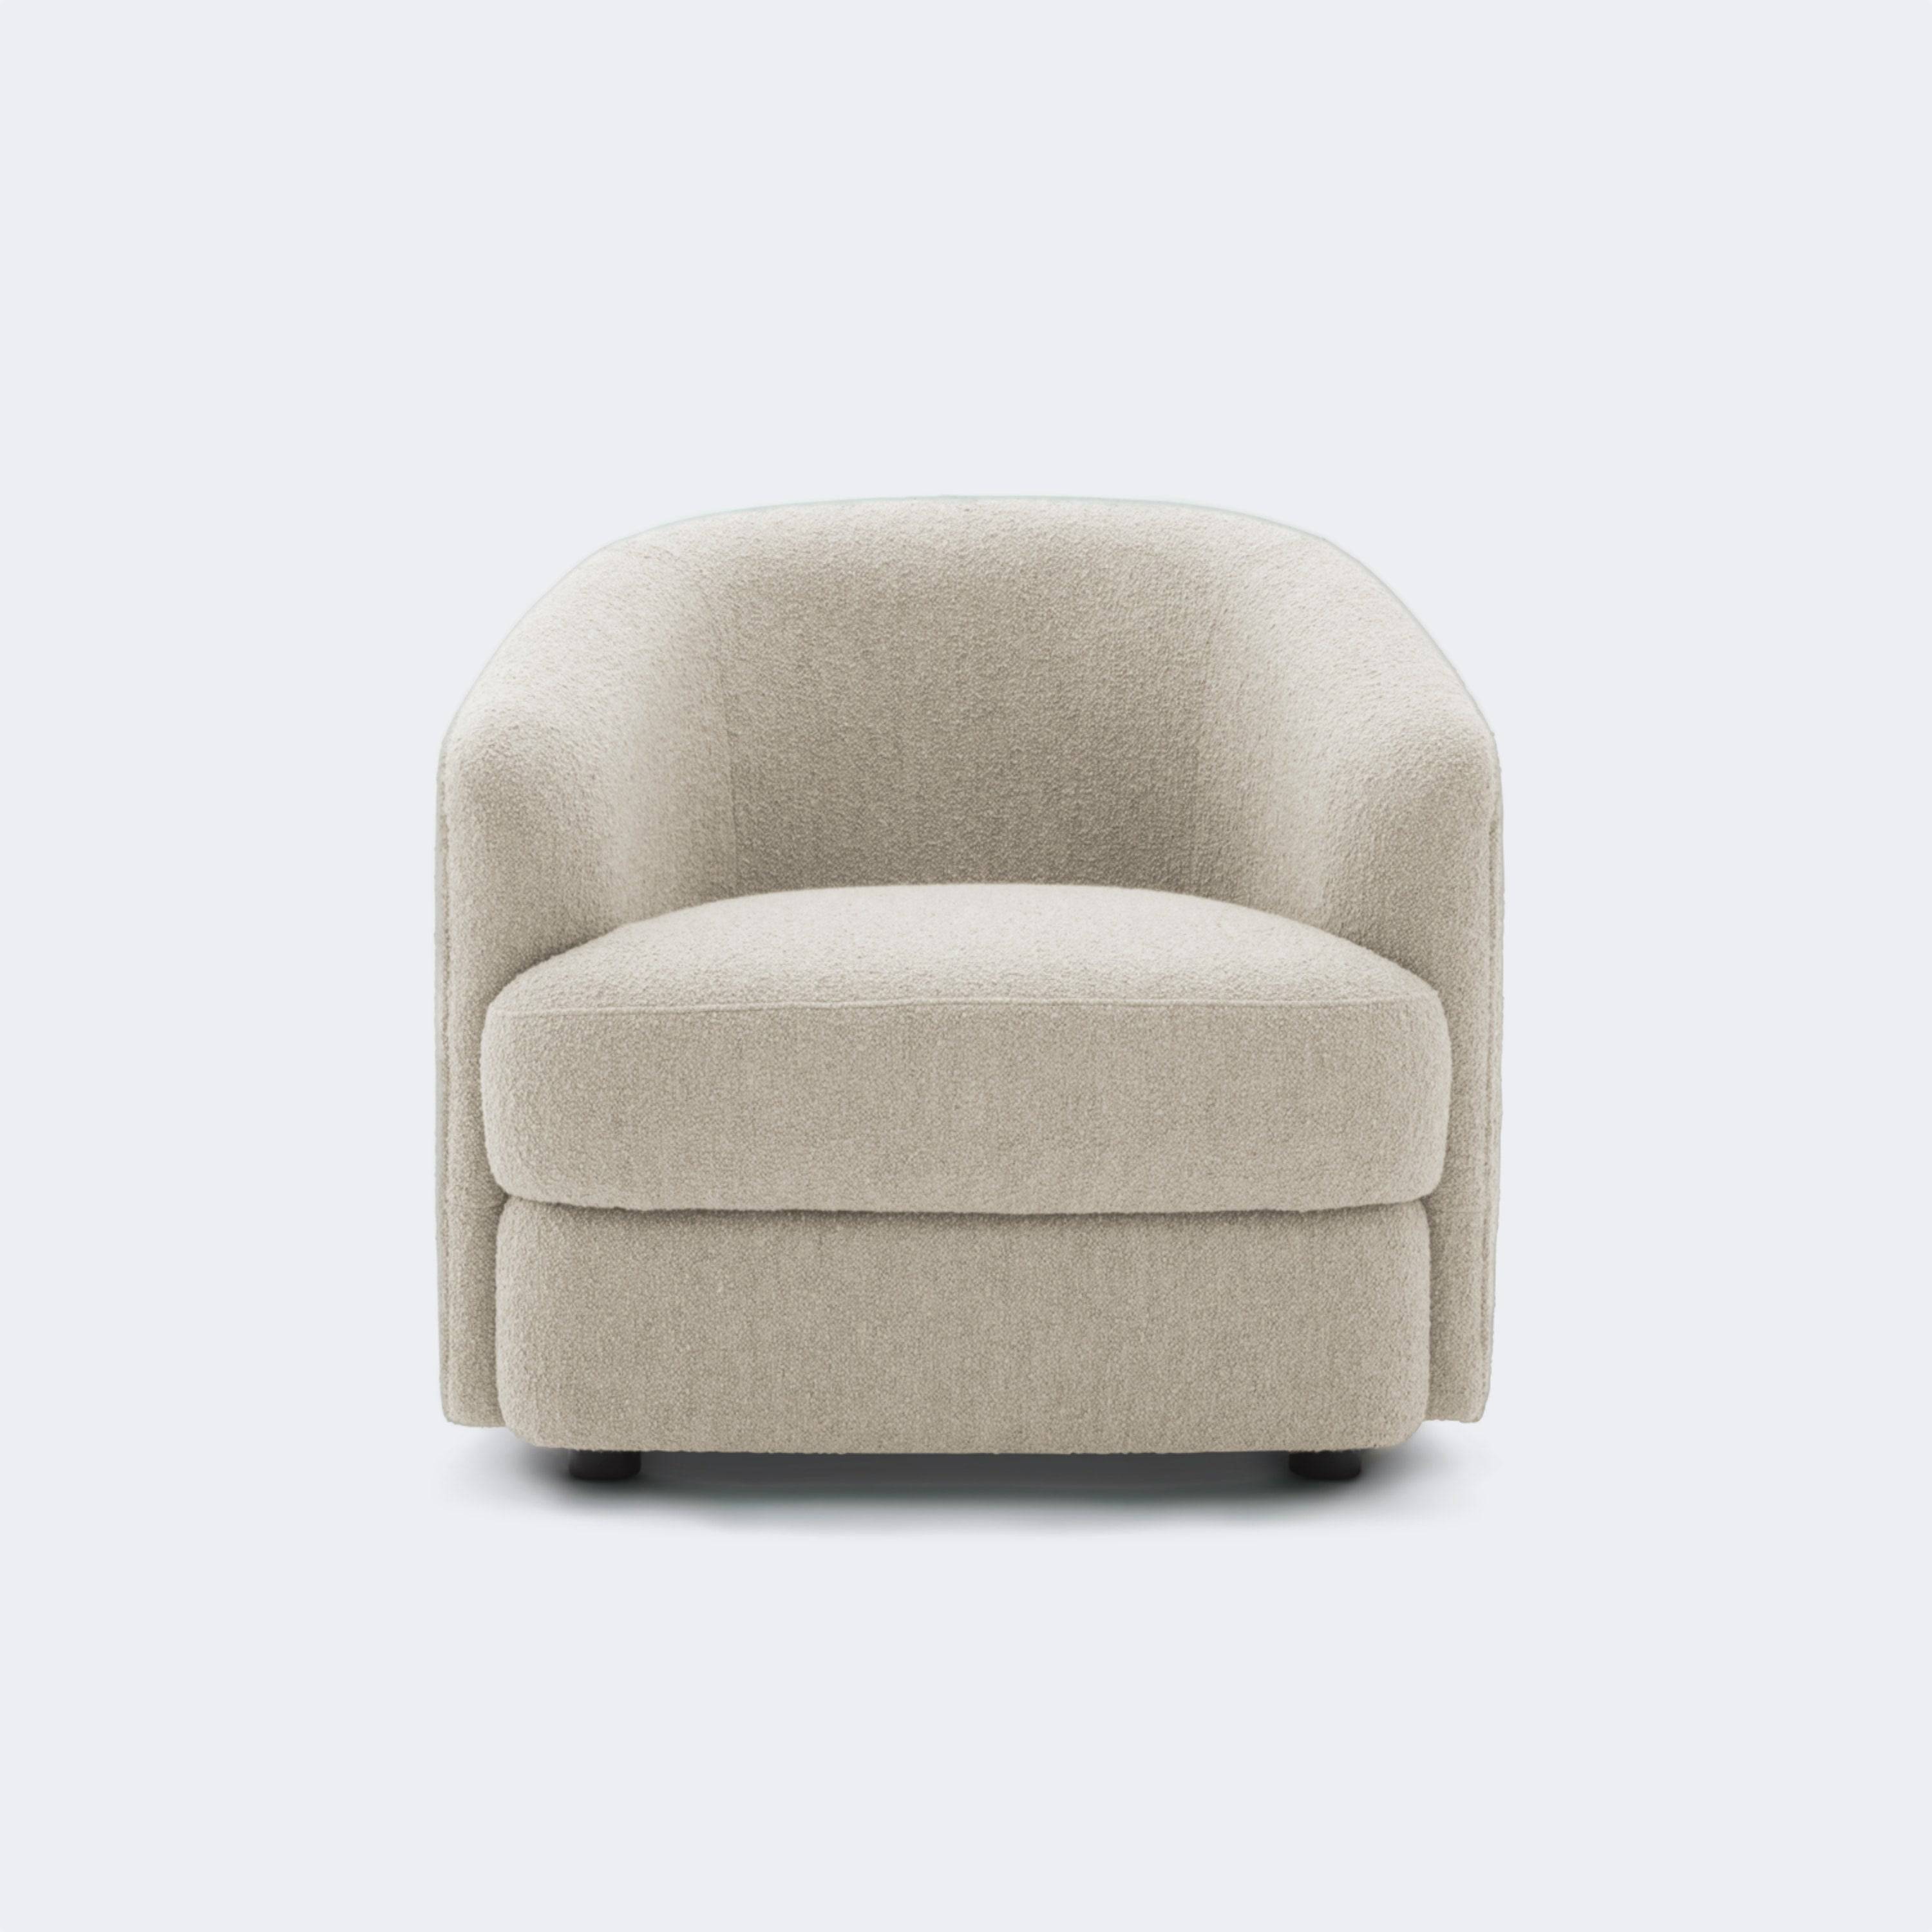 New Works Covent Lounge Chair Lana - KANSO#Upholstery_Lana